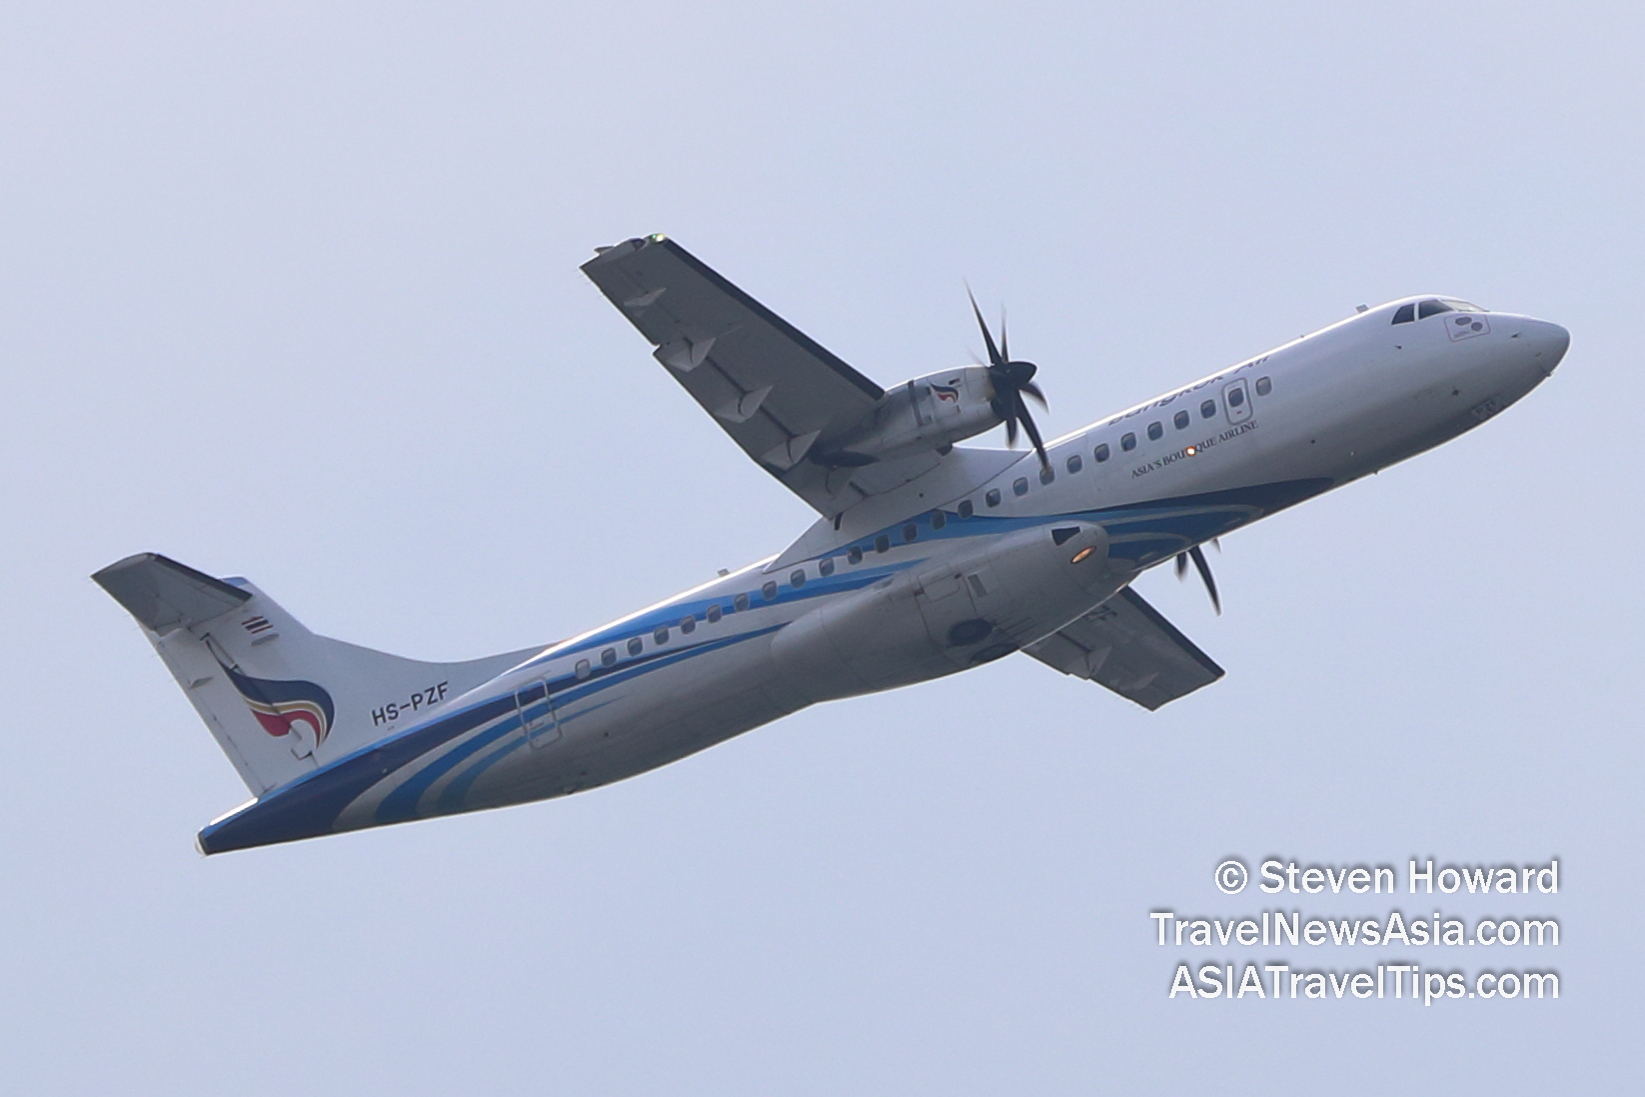 Bangkok Airways ATR 72-600 reg: HS-PZF. Picture by Steven Howard of TravelNewsAsia.com Click to enlarge.